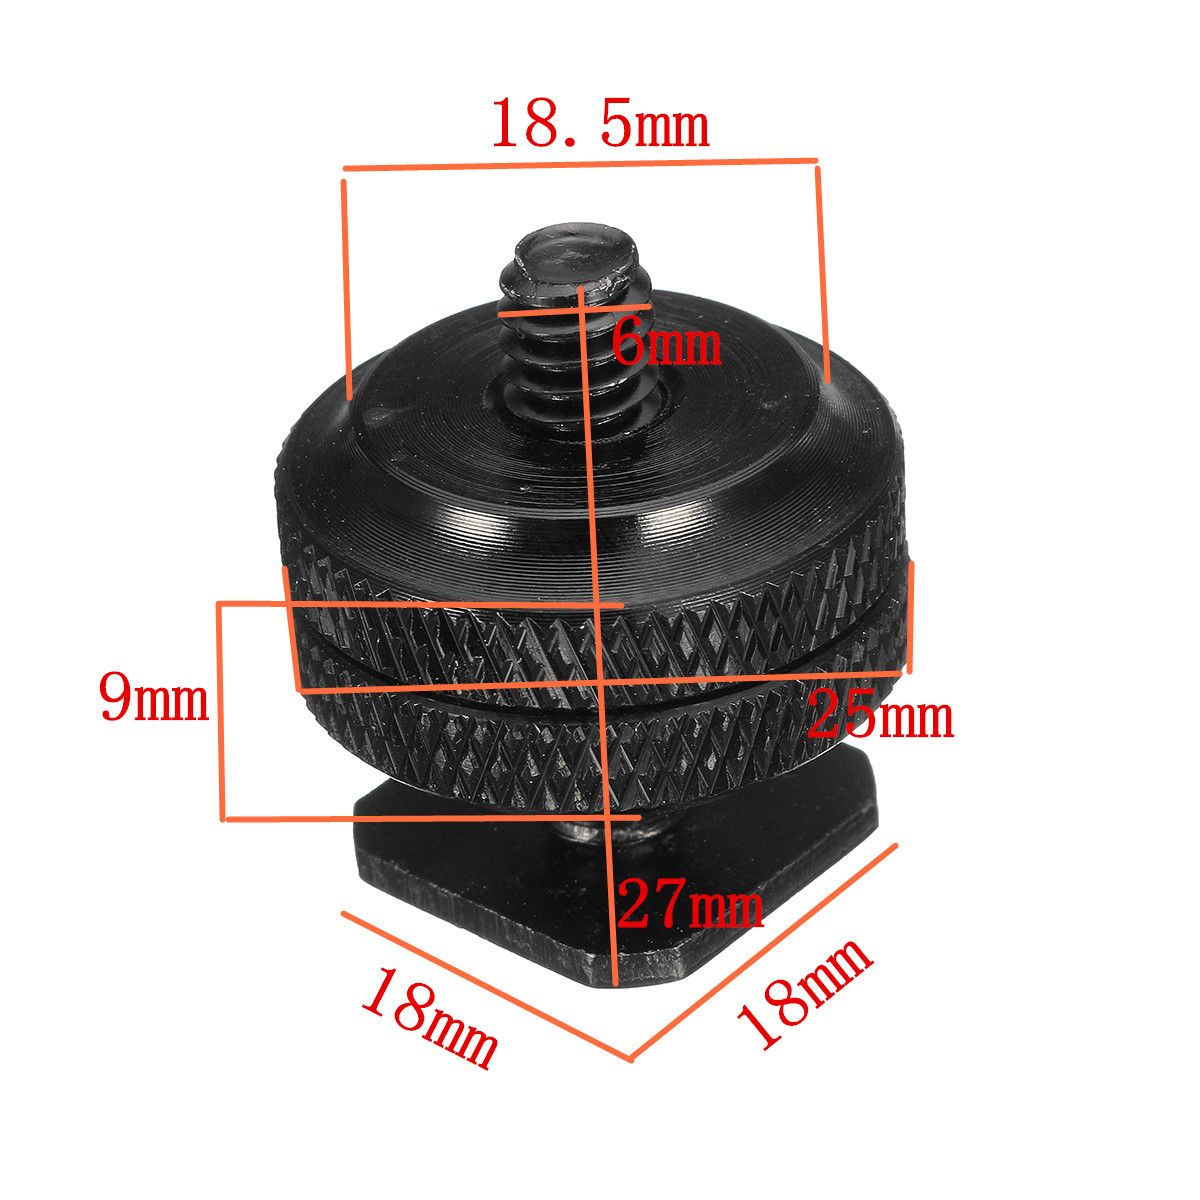 Dual-Nuts-Metal-Tripod-Mount-Screw-to-Flash-Camera-Light-Stand-Hot-Shoe-Adapter-1132915